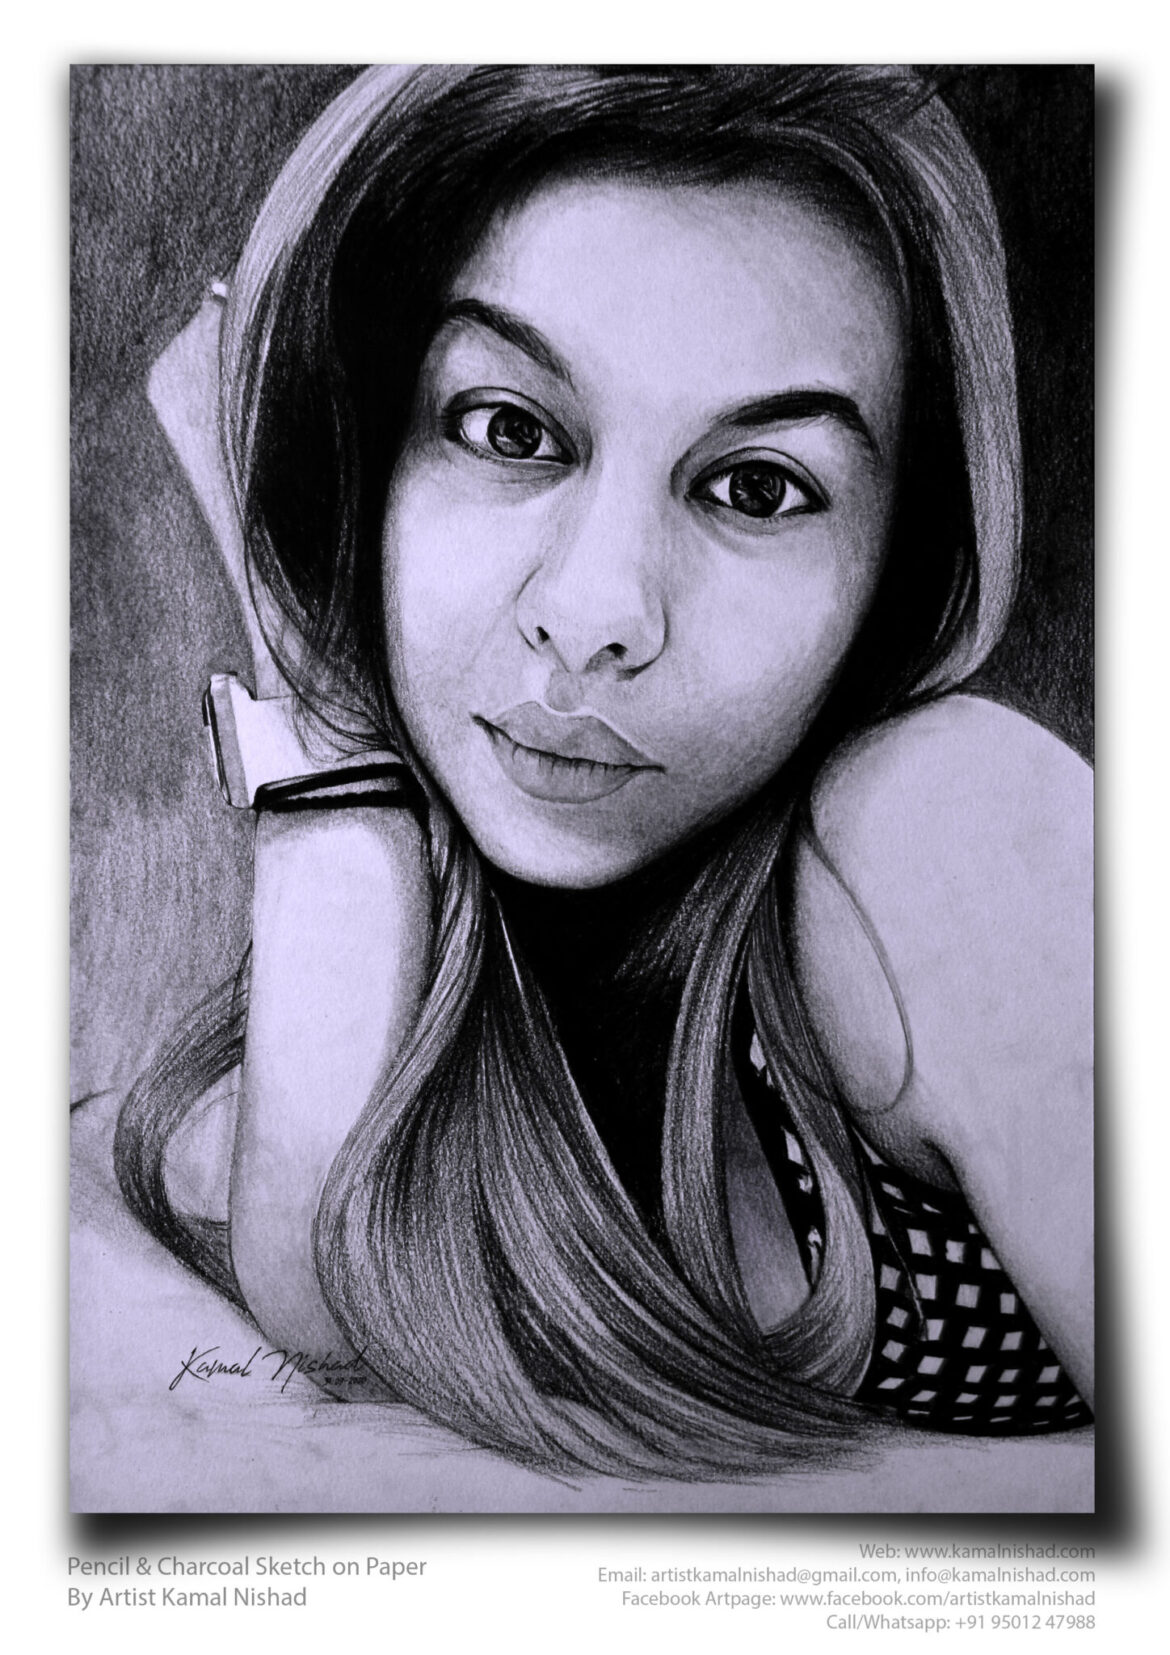 REMARKABLE | Pencil & Charcoal Sketch Title : REMARKABLE Medium : Pencil & Charcoal Sketch Size : A3 (11.7 x 16.5 inch*) Artist : Kamal Nishad This is a Handmade/hand-drawn Sketch made with Pencil & Charcoal “REMARKABLE”. One of my client/customer wanted me to draw this portrait for his family member to give her a gift. SIZE: A3 (11.7 x 16.5 inches *estimated) Created by © Kamal Nishad. All rights reserved.